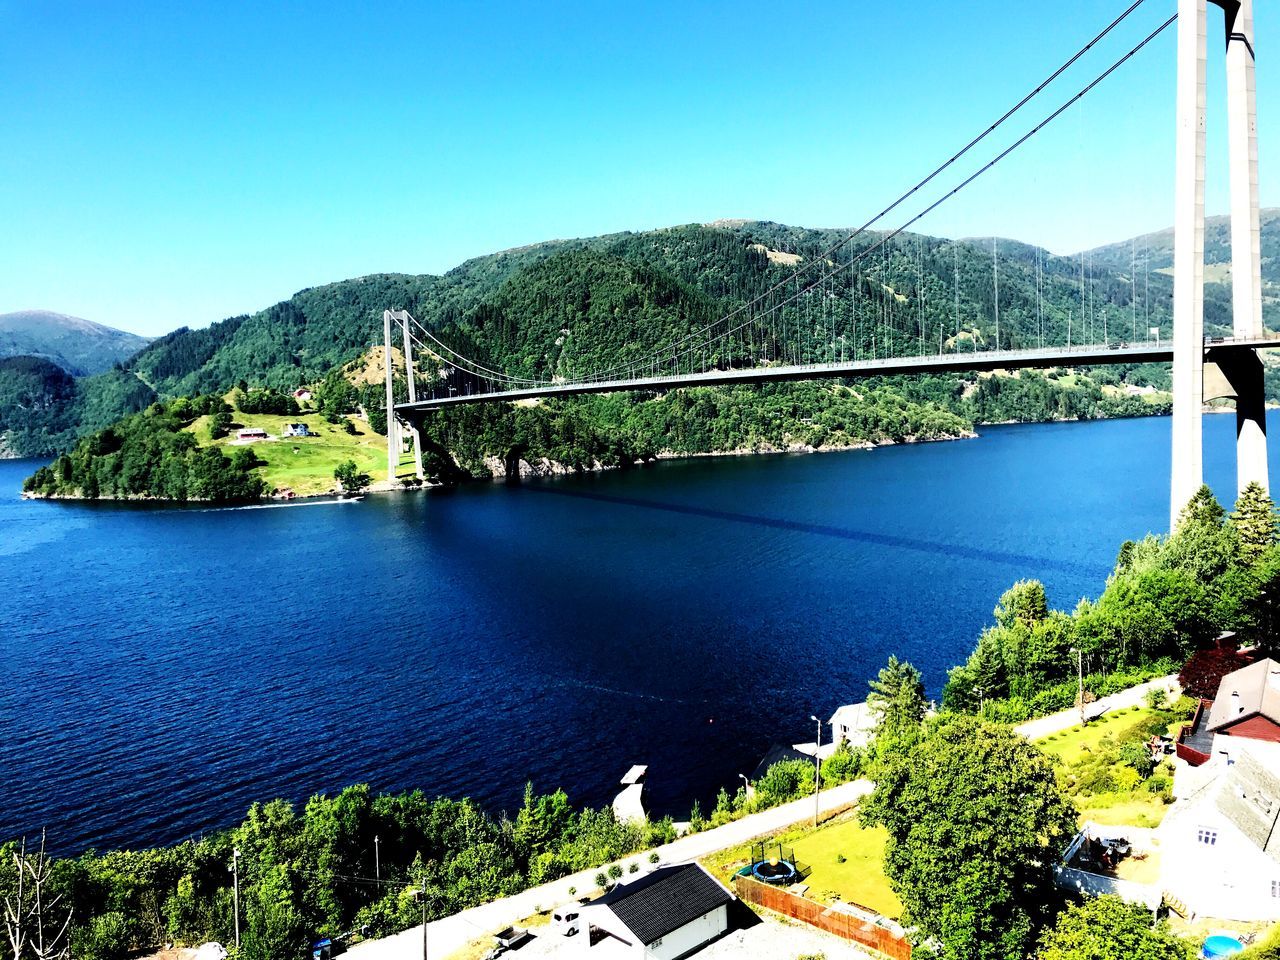 mountain, water, sky, tree, architecture, plant, nature, built structure, scenics - nature, day, blue, clear sky, transportation, no people, beauty in nature, connection, river, building exterior, bridge, bridge - man made structure, outdoors, mountain range, bay